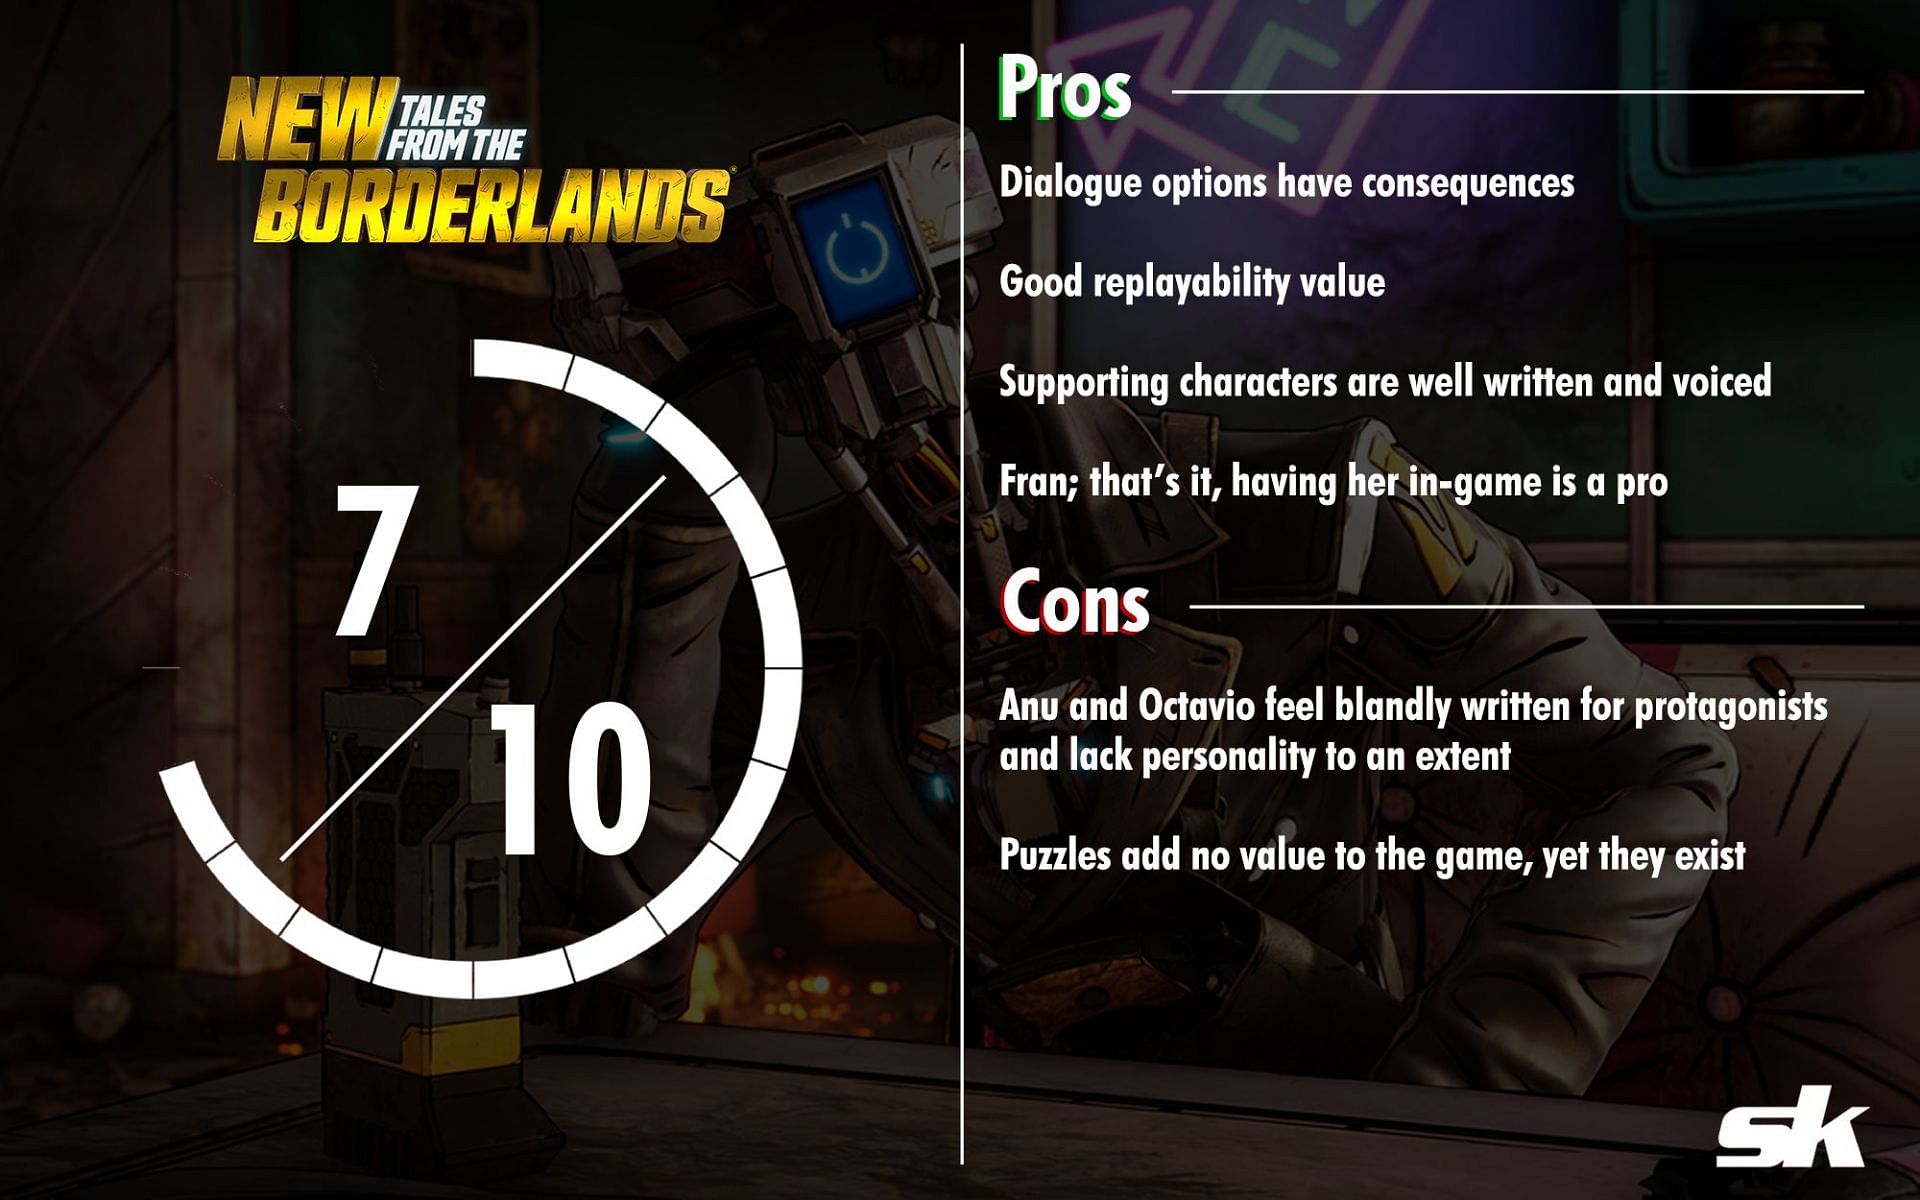 New Tales from the Borderlands ratings by Sportskeeda (Image via 2K/New Tales from the Borderlands)